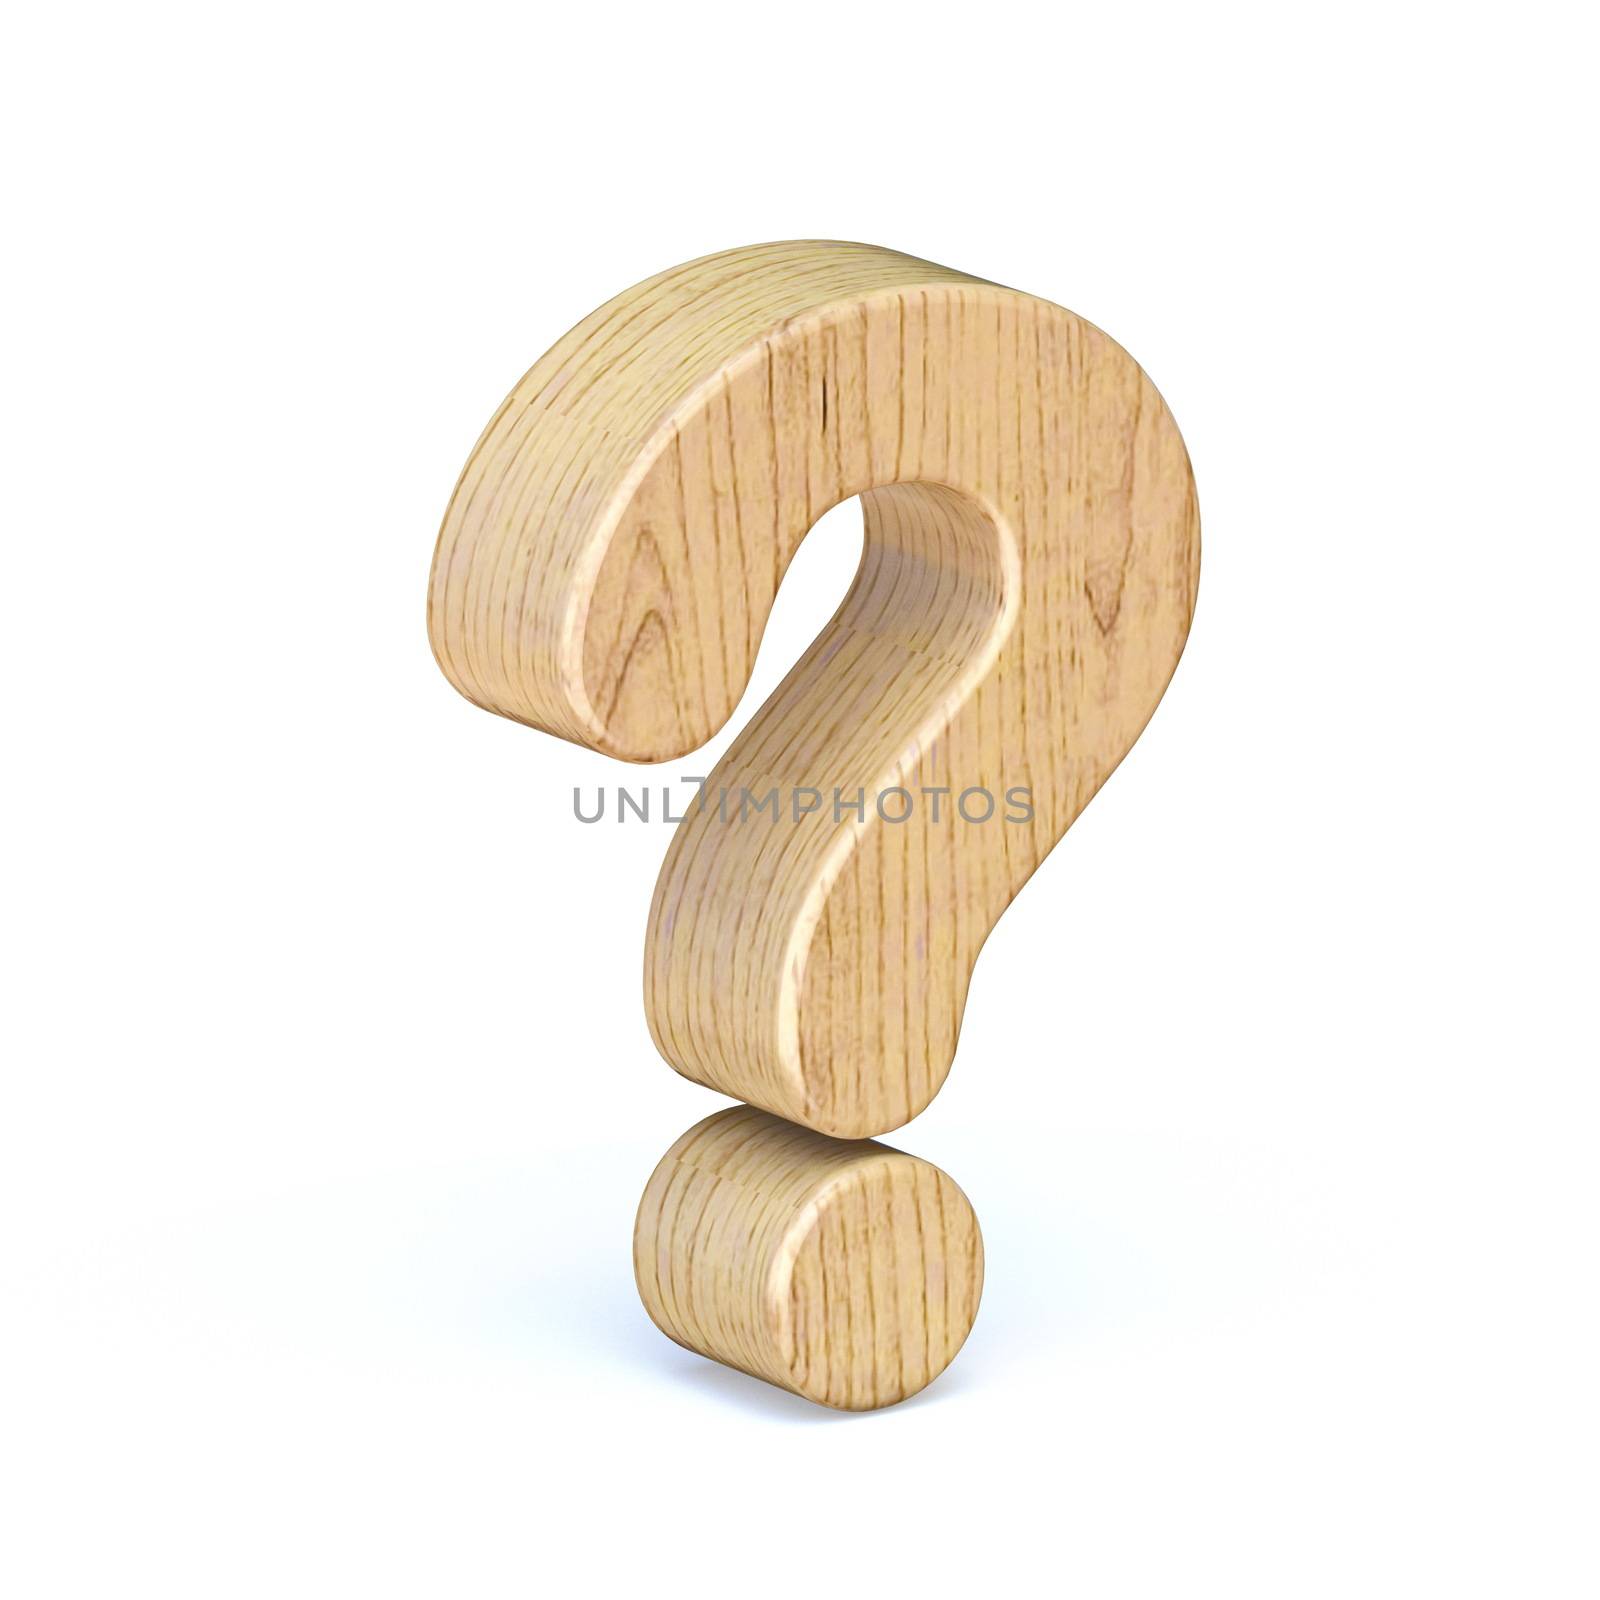 Rounded wooden font question mark 3D render illustration isolated on white background